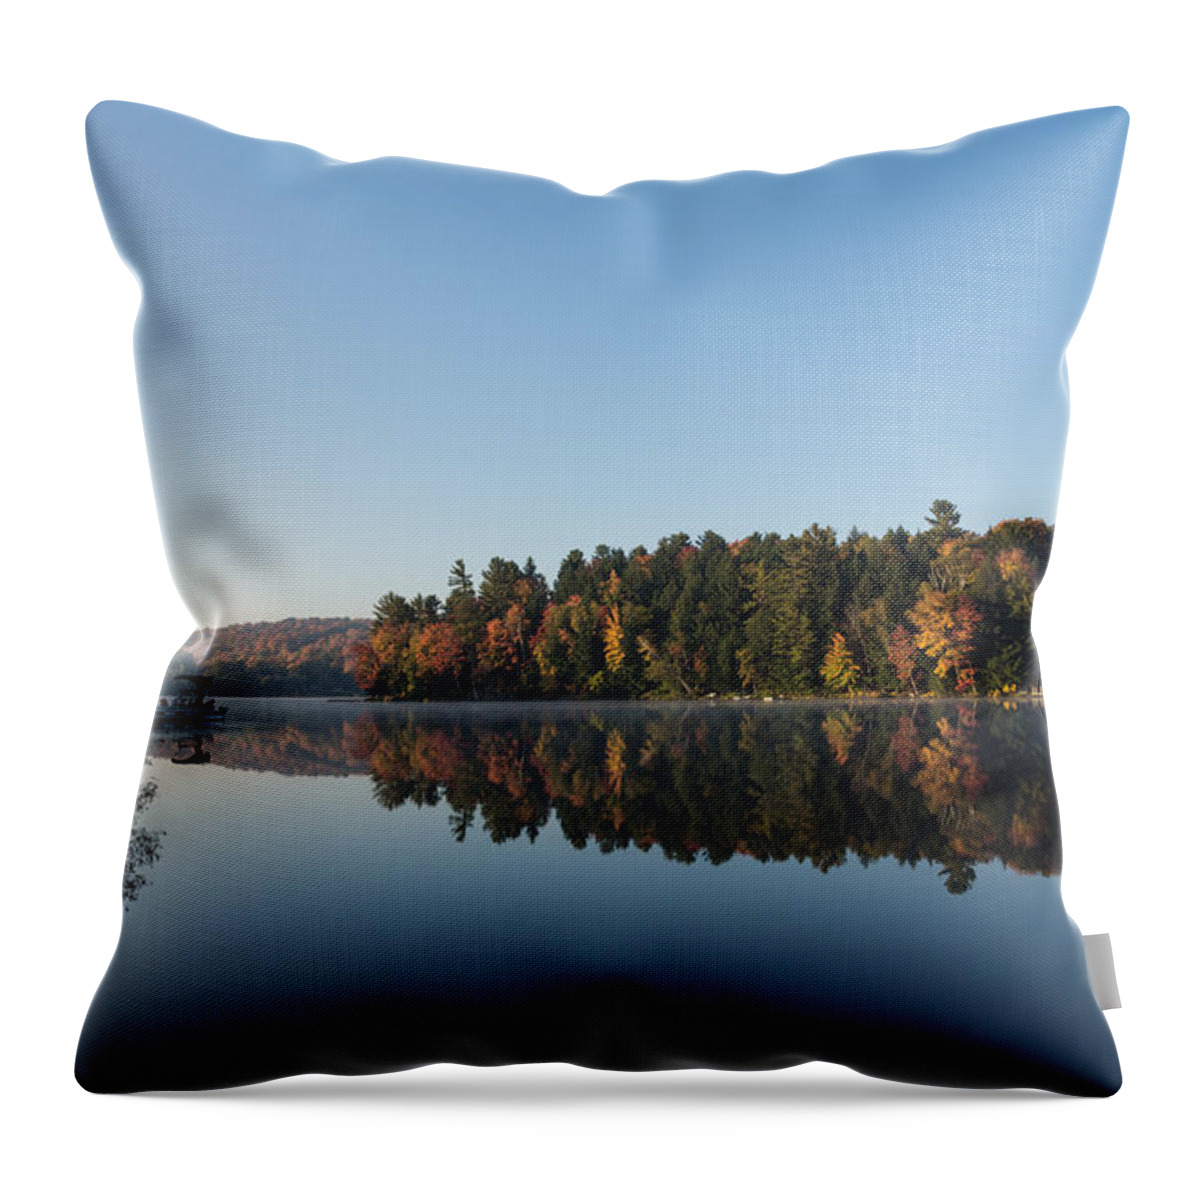 Lakeside Living Throw Pillow featuring the photograph Lakeside Cottage Living - Peaceful Morning Mirror by Georgia Mizuleva